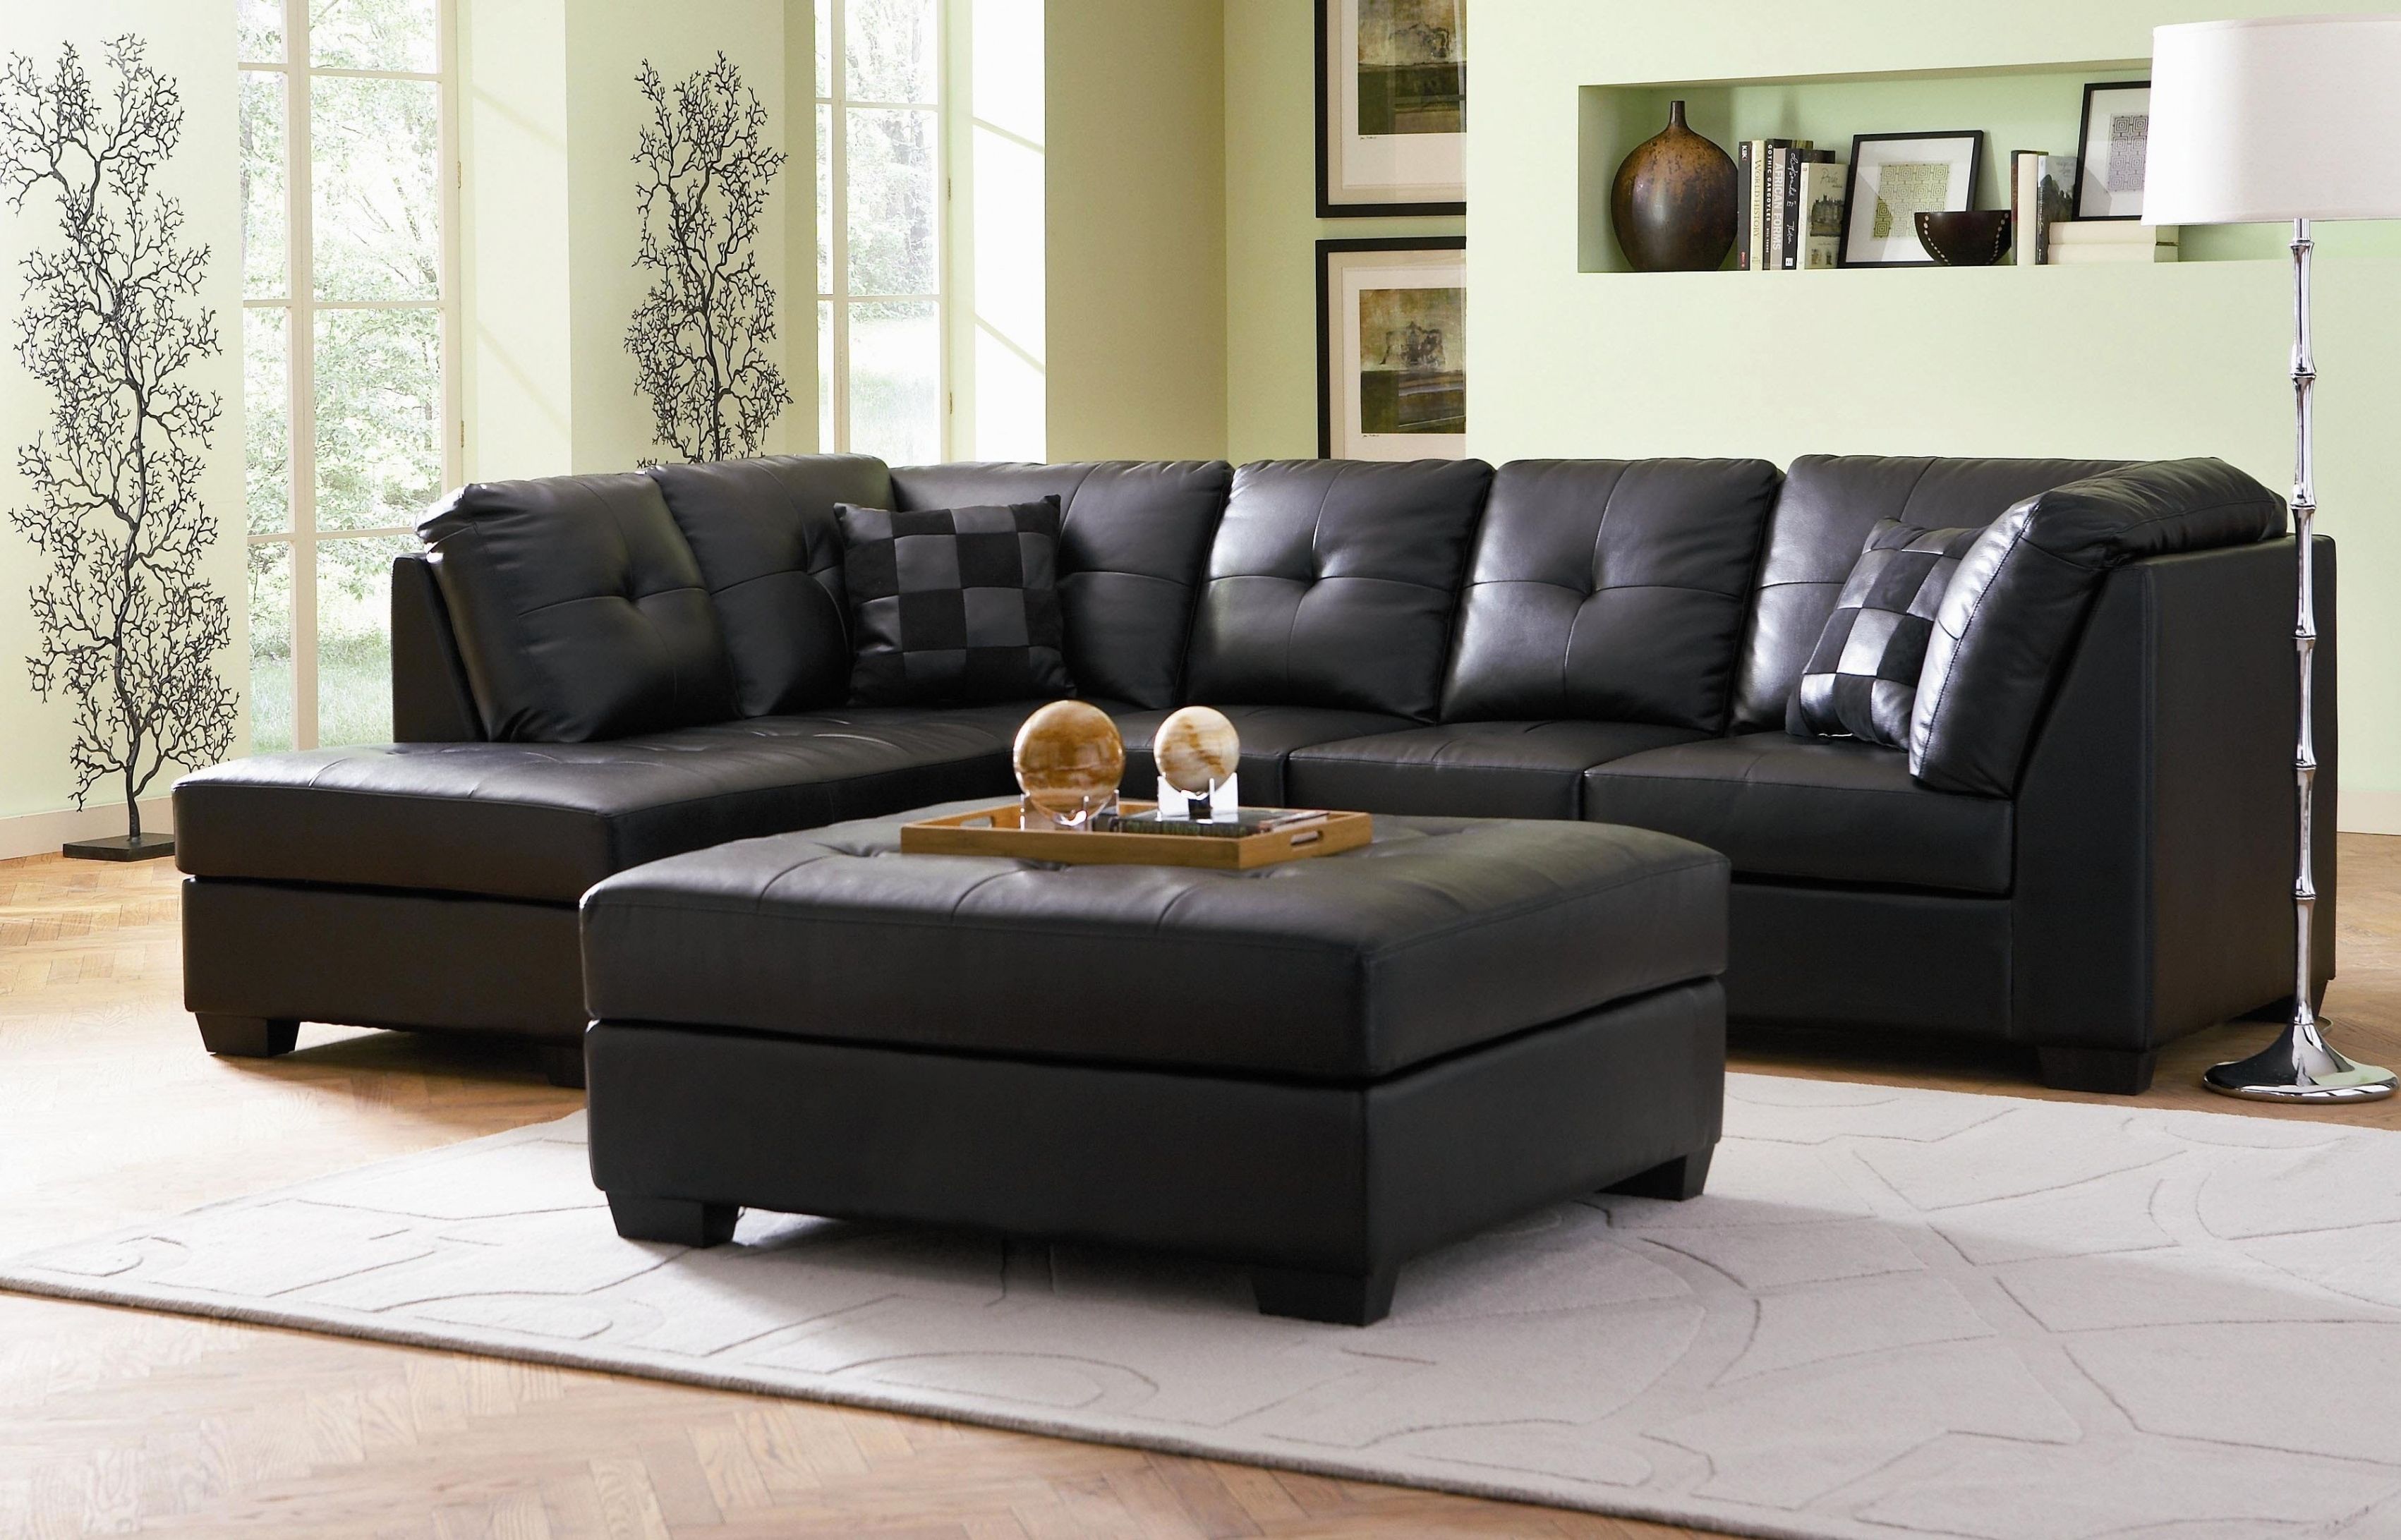 Well Known Sectional Sofas Under 200 With Regard To Furniture: Using Pretty Cheap Sectional Sofas Under 300 For (View 1 of 20)